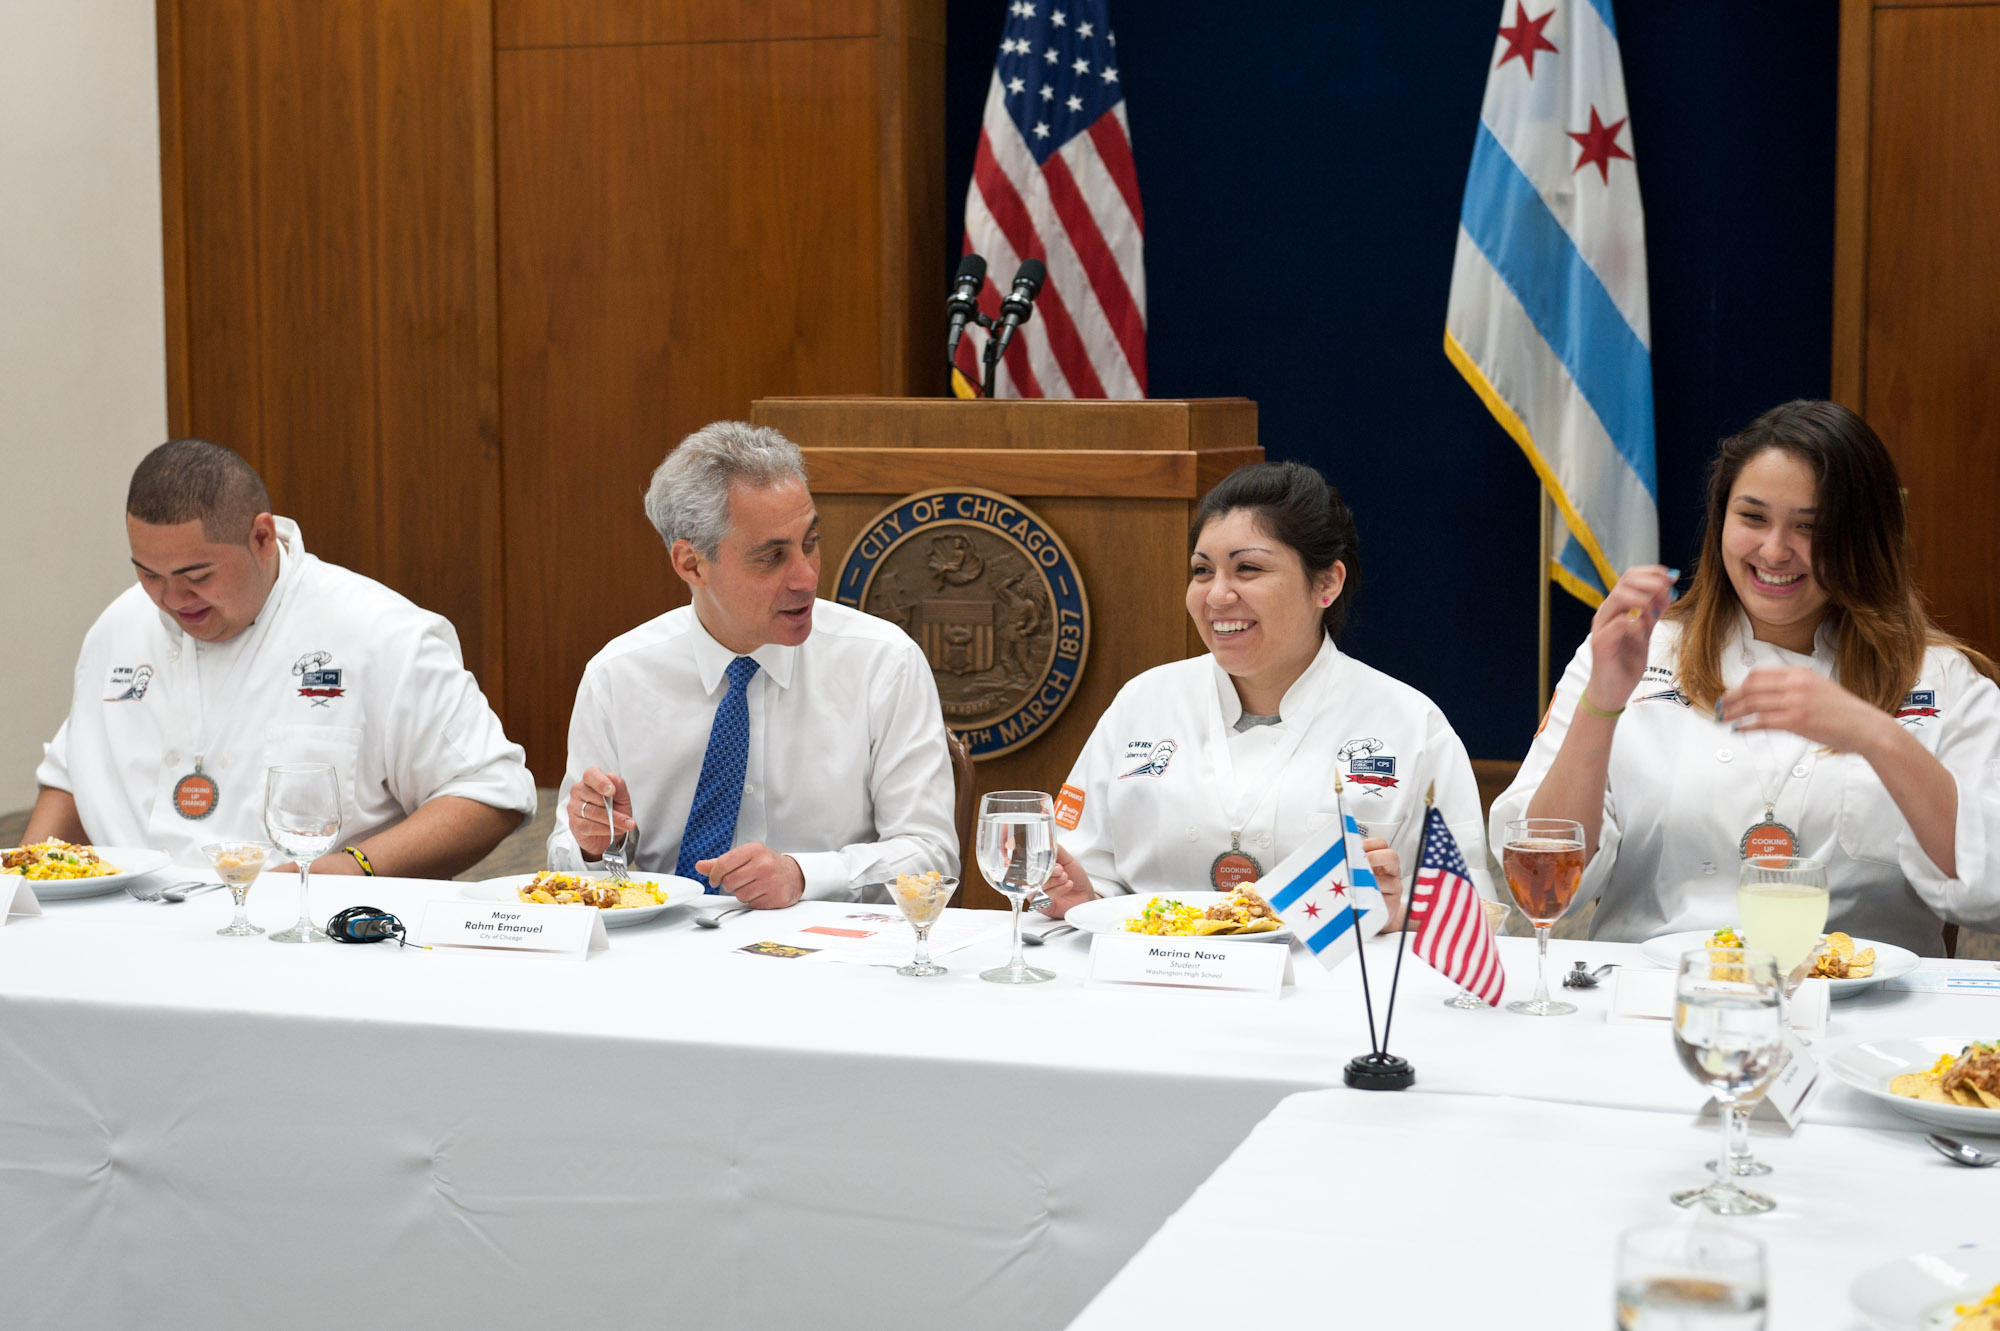 Mayor Rahm Emanuel Joins Students from George Washington High School, Winners of an Honorable Mention for Best Presentation in “Cooking up Change” Healthy Cooking Contest in Washington D.C.